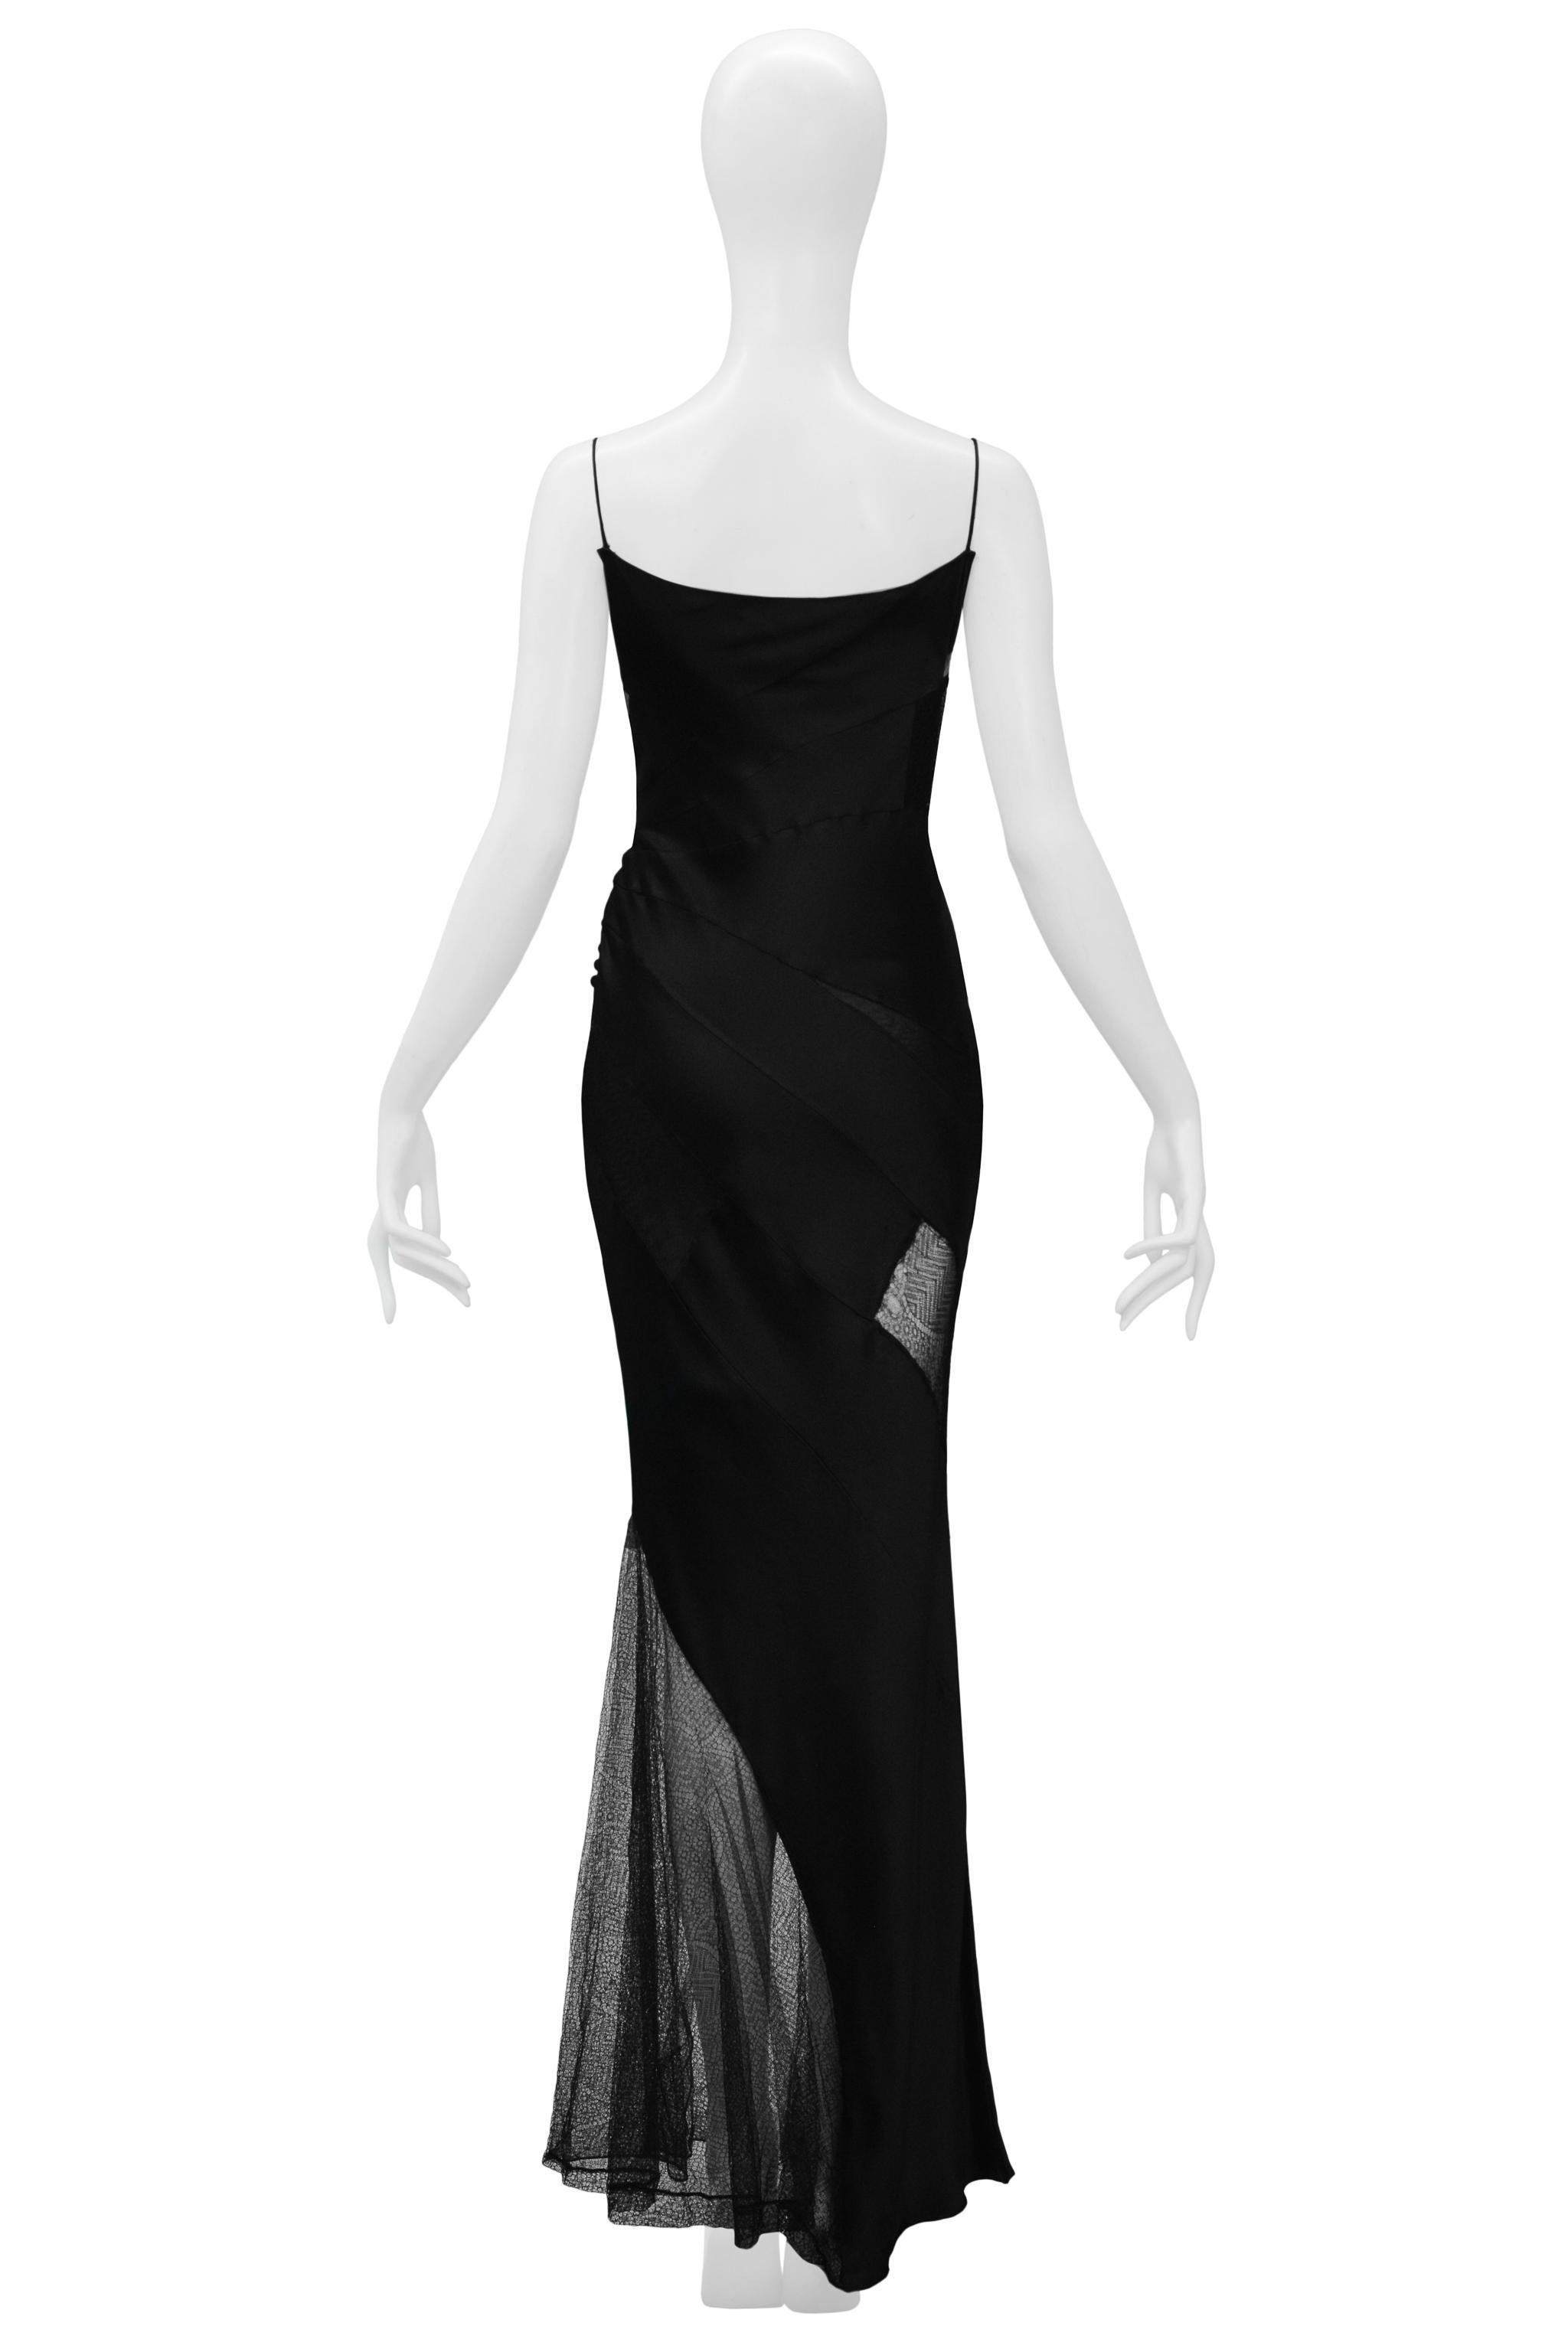 Women's Christian Dior By John Galliano Black Slip Evening Dress With Lace Insets